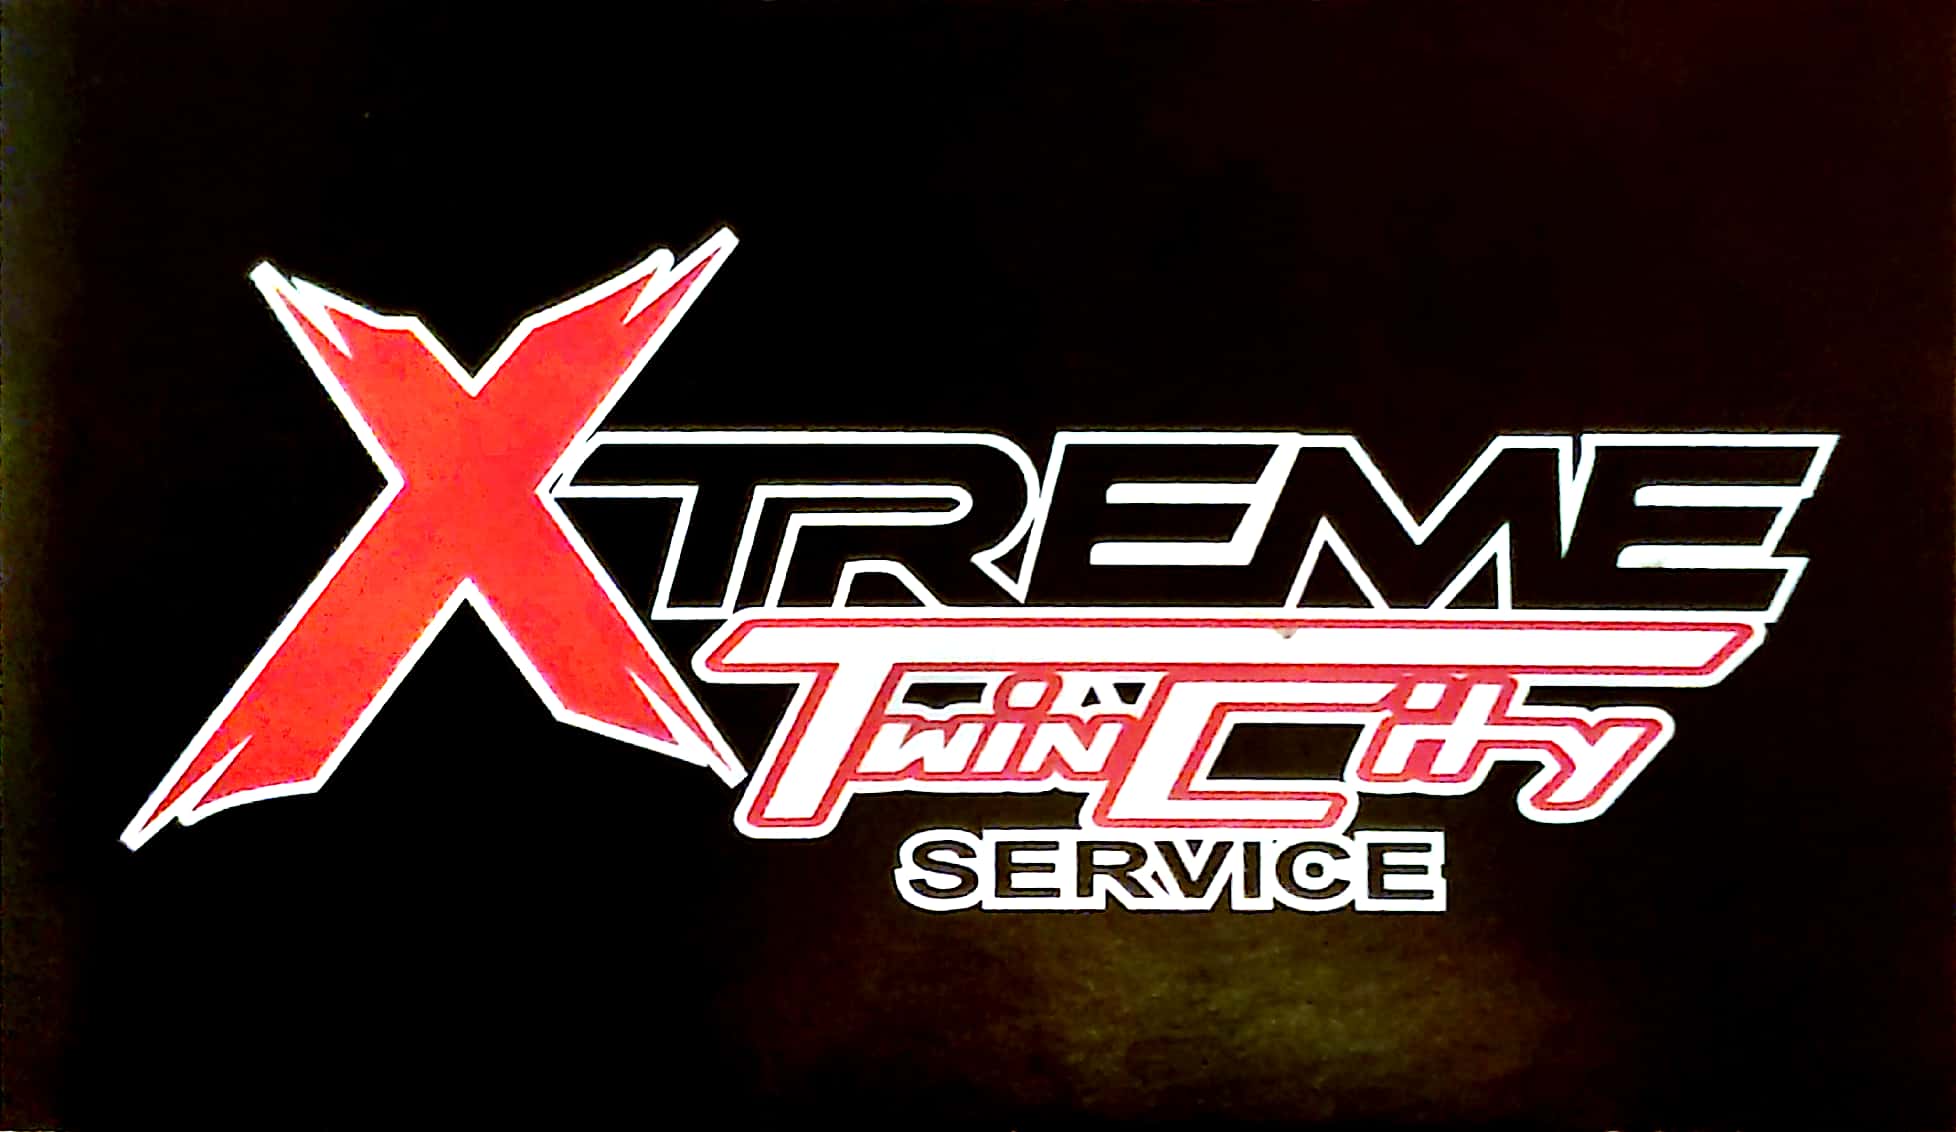 Twin City Xtreme Towing/Tilt & Load Services Kitchener  DriveLink.ca